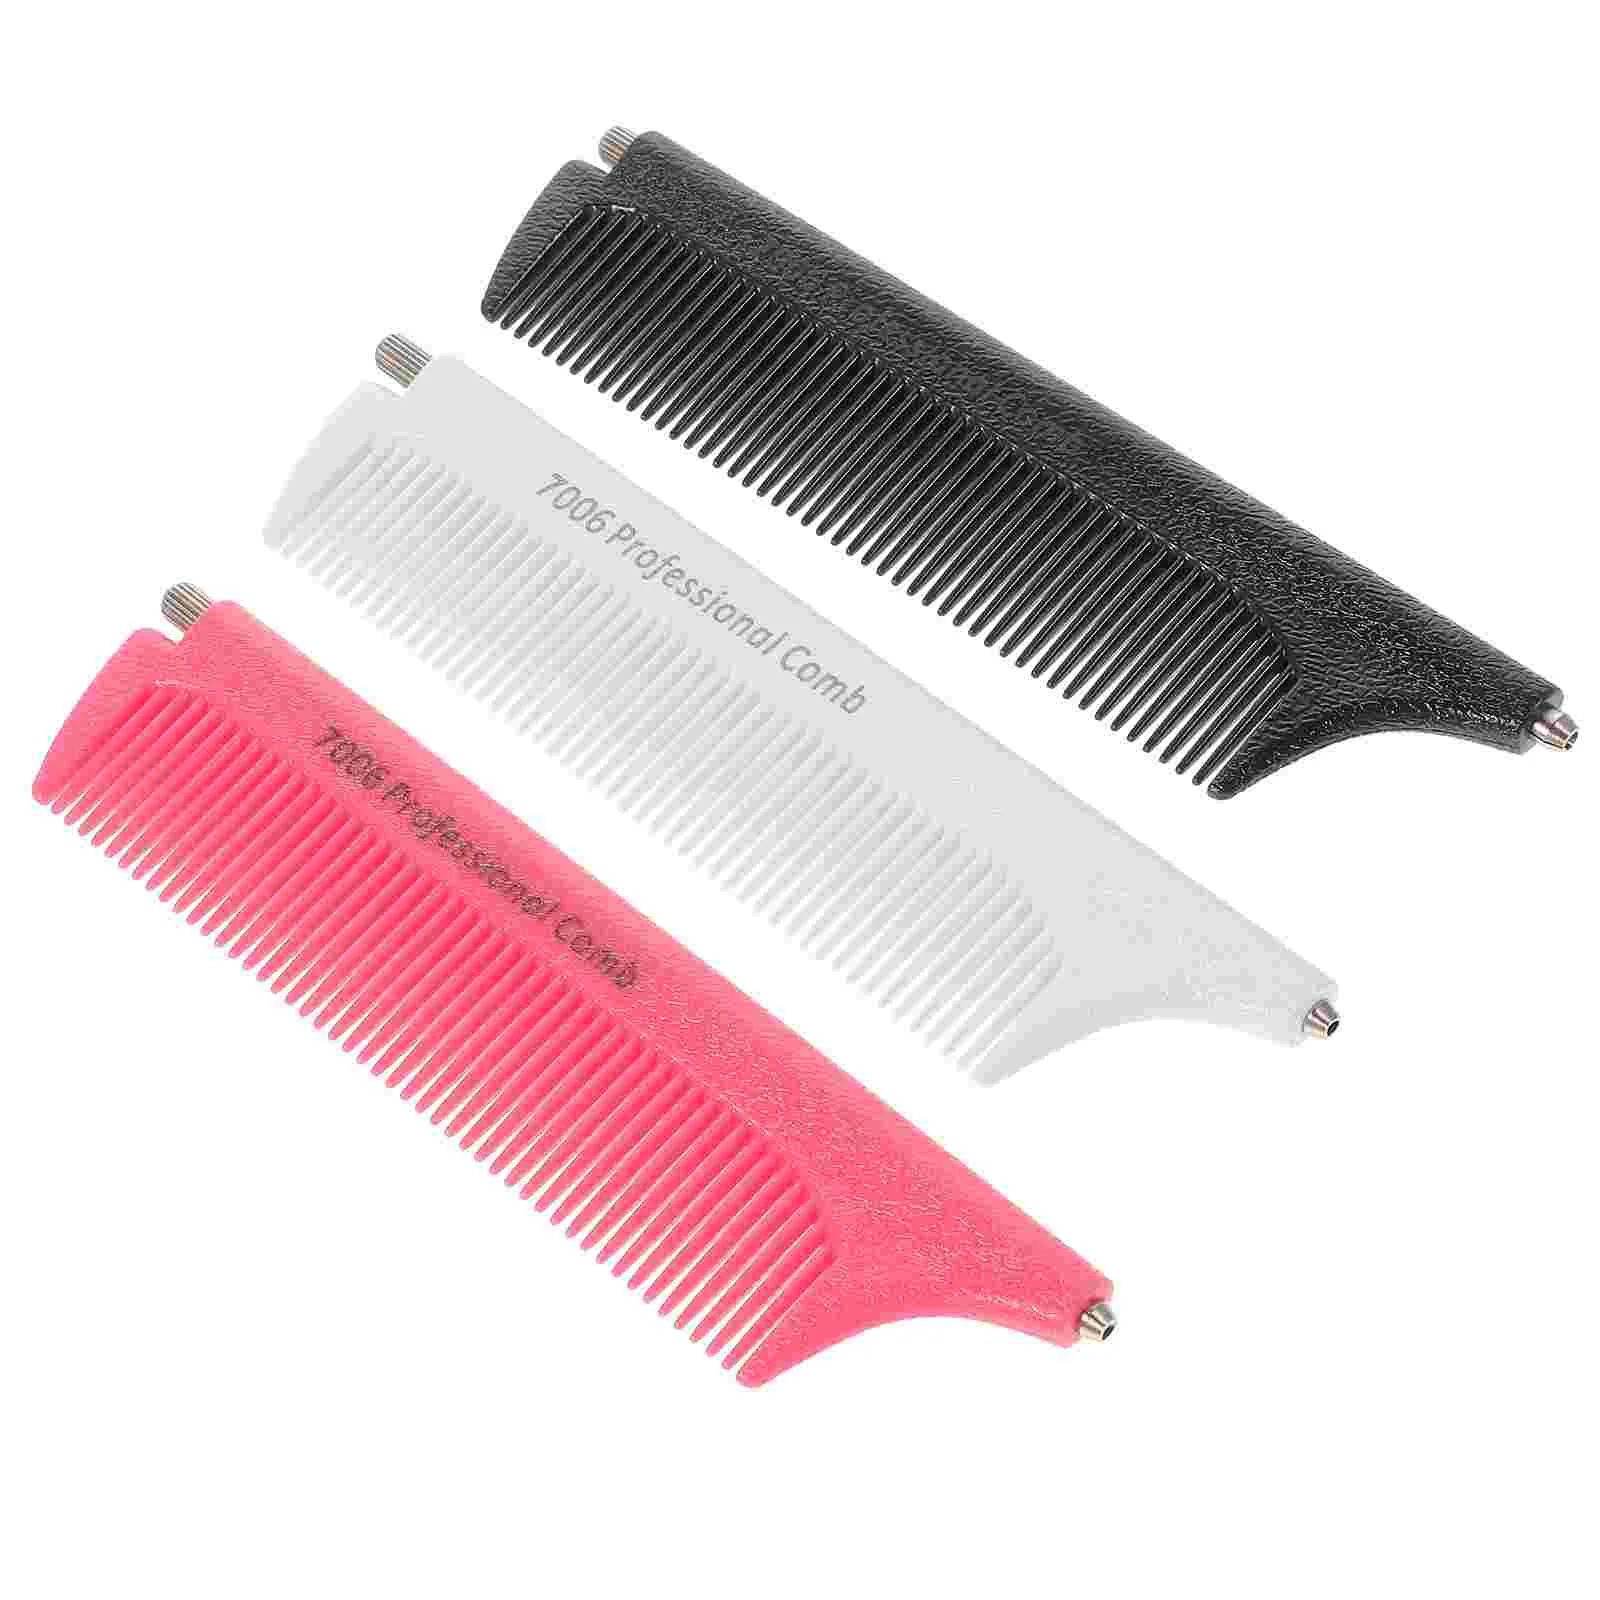 3 Pcs Hair Brush Women Styling Comb Steel Teasing Combs Rat Tail Parting Tooth Cutting Salon Anti- Static